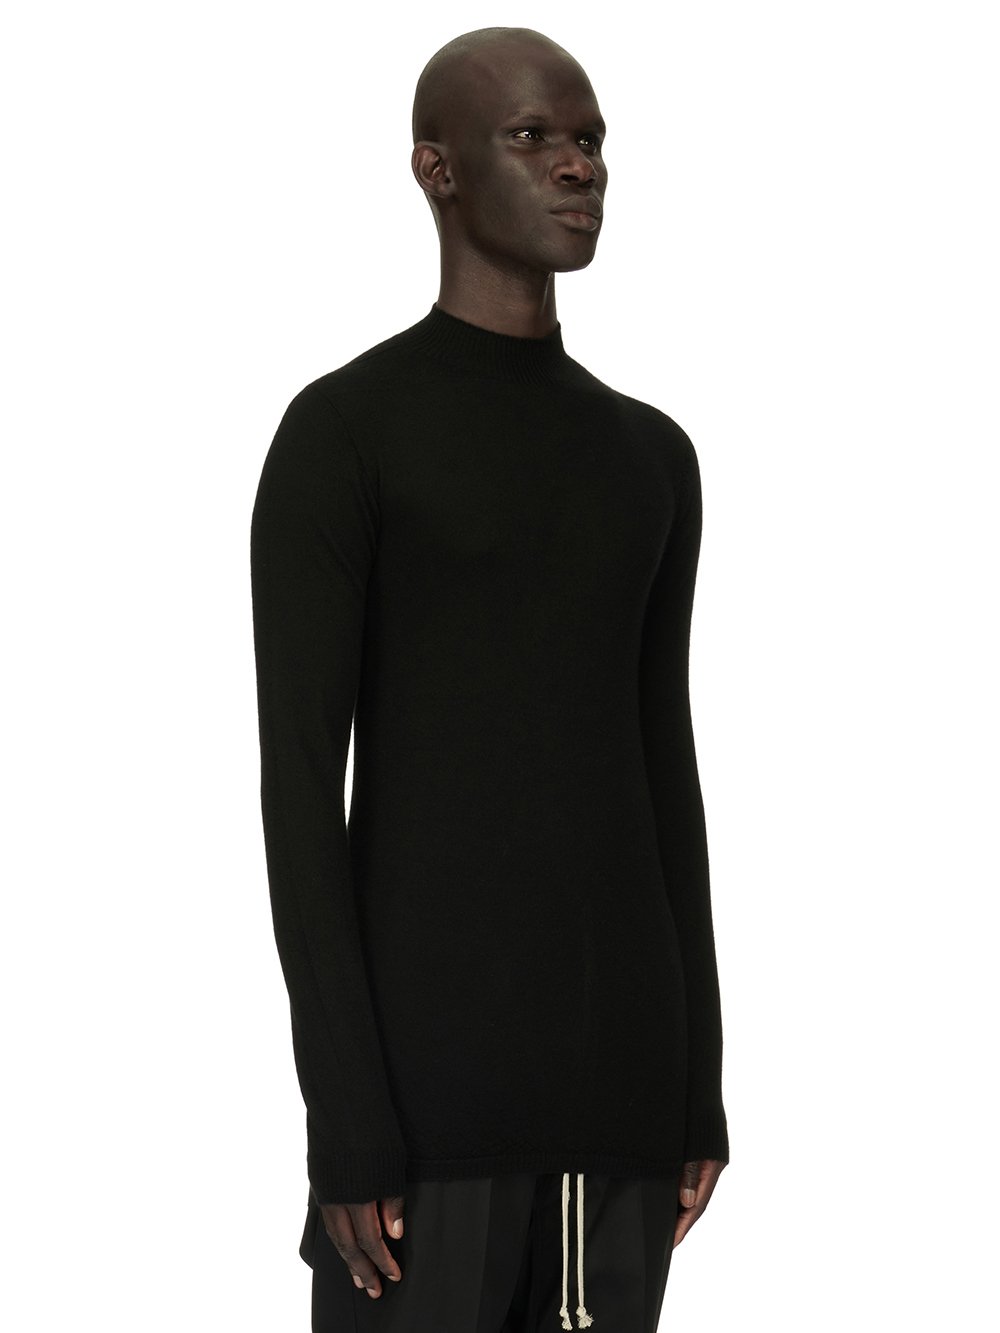 RICK OWENS FOREVER LEVEL LUPETTO SWEATER IN BLACK LIGHTWEIGHT RASATO KNIT